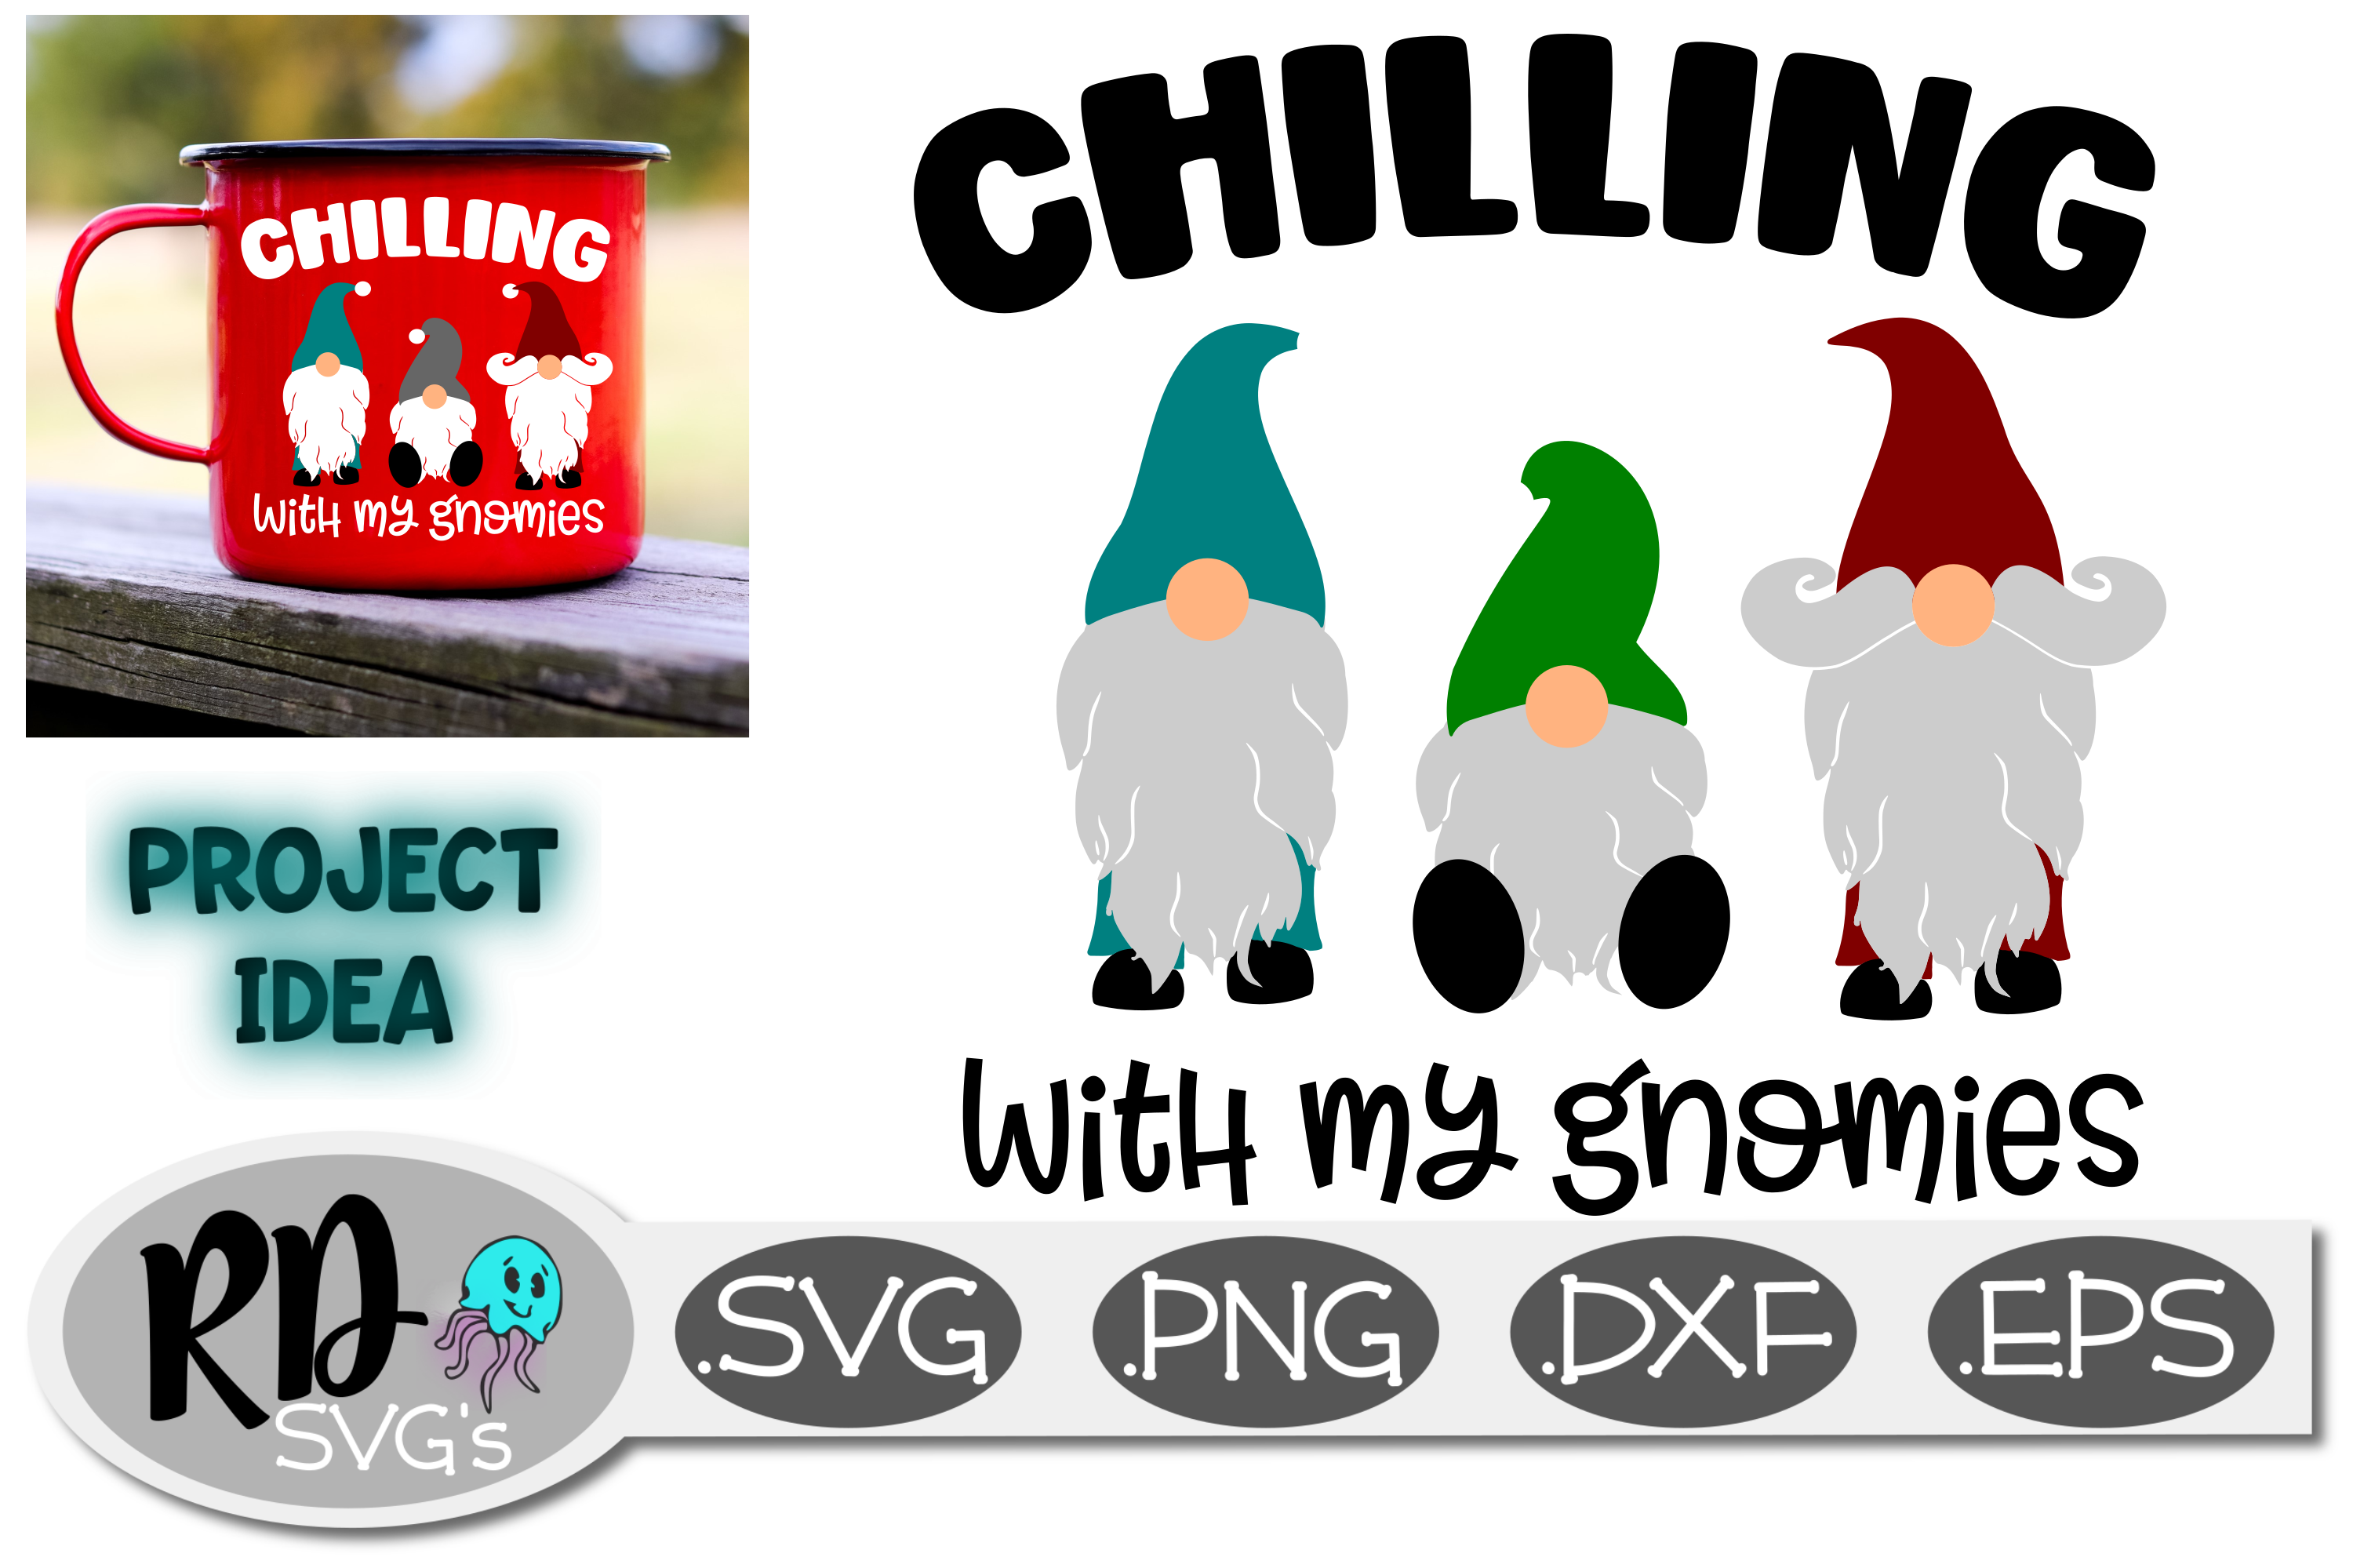 Chilling with my Gnomies - A Cricut Christmas Cutting File (302892